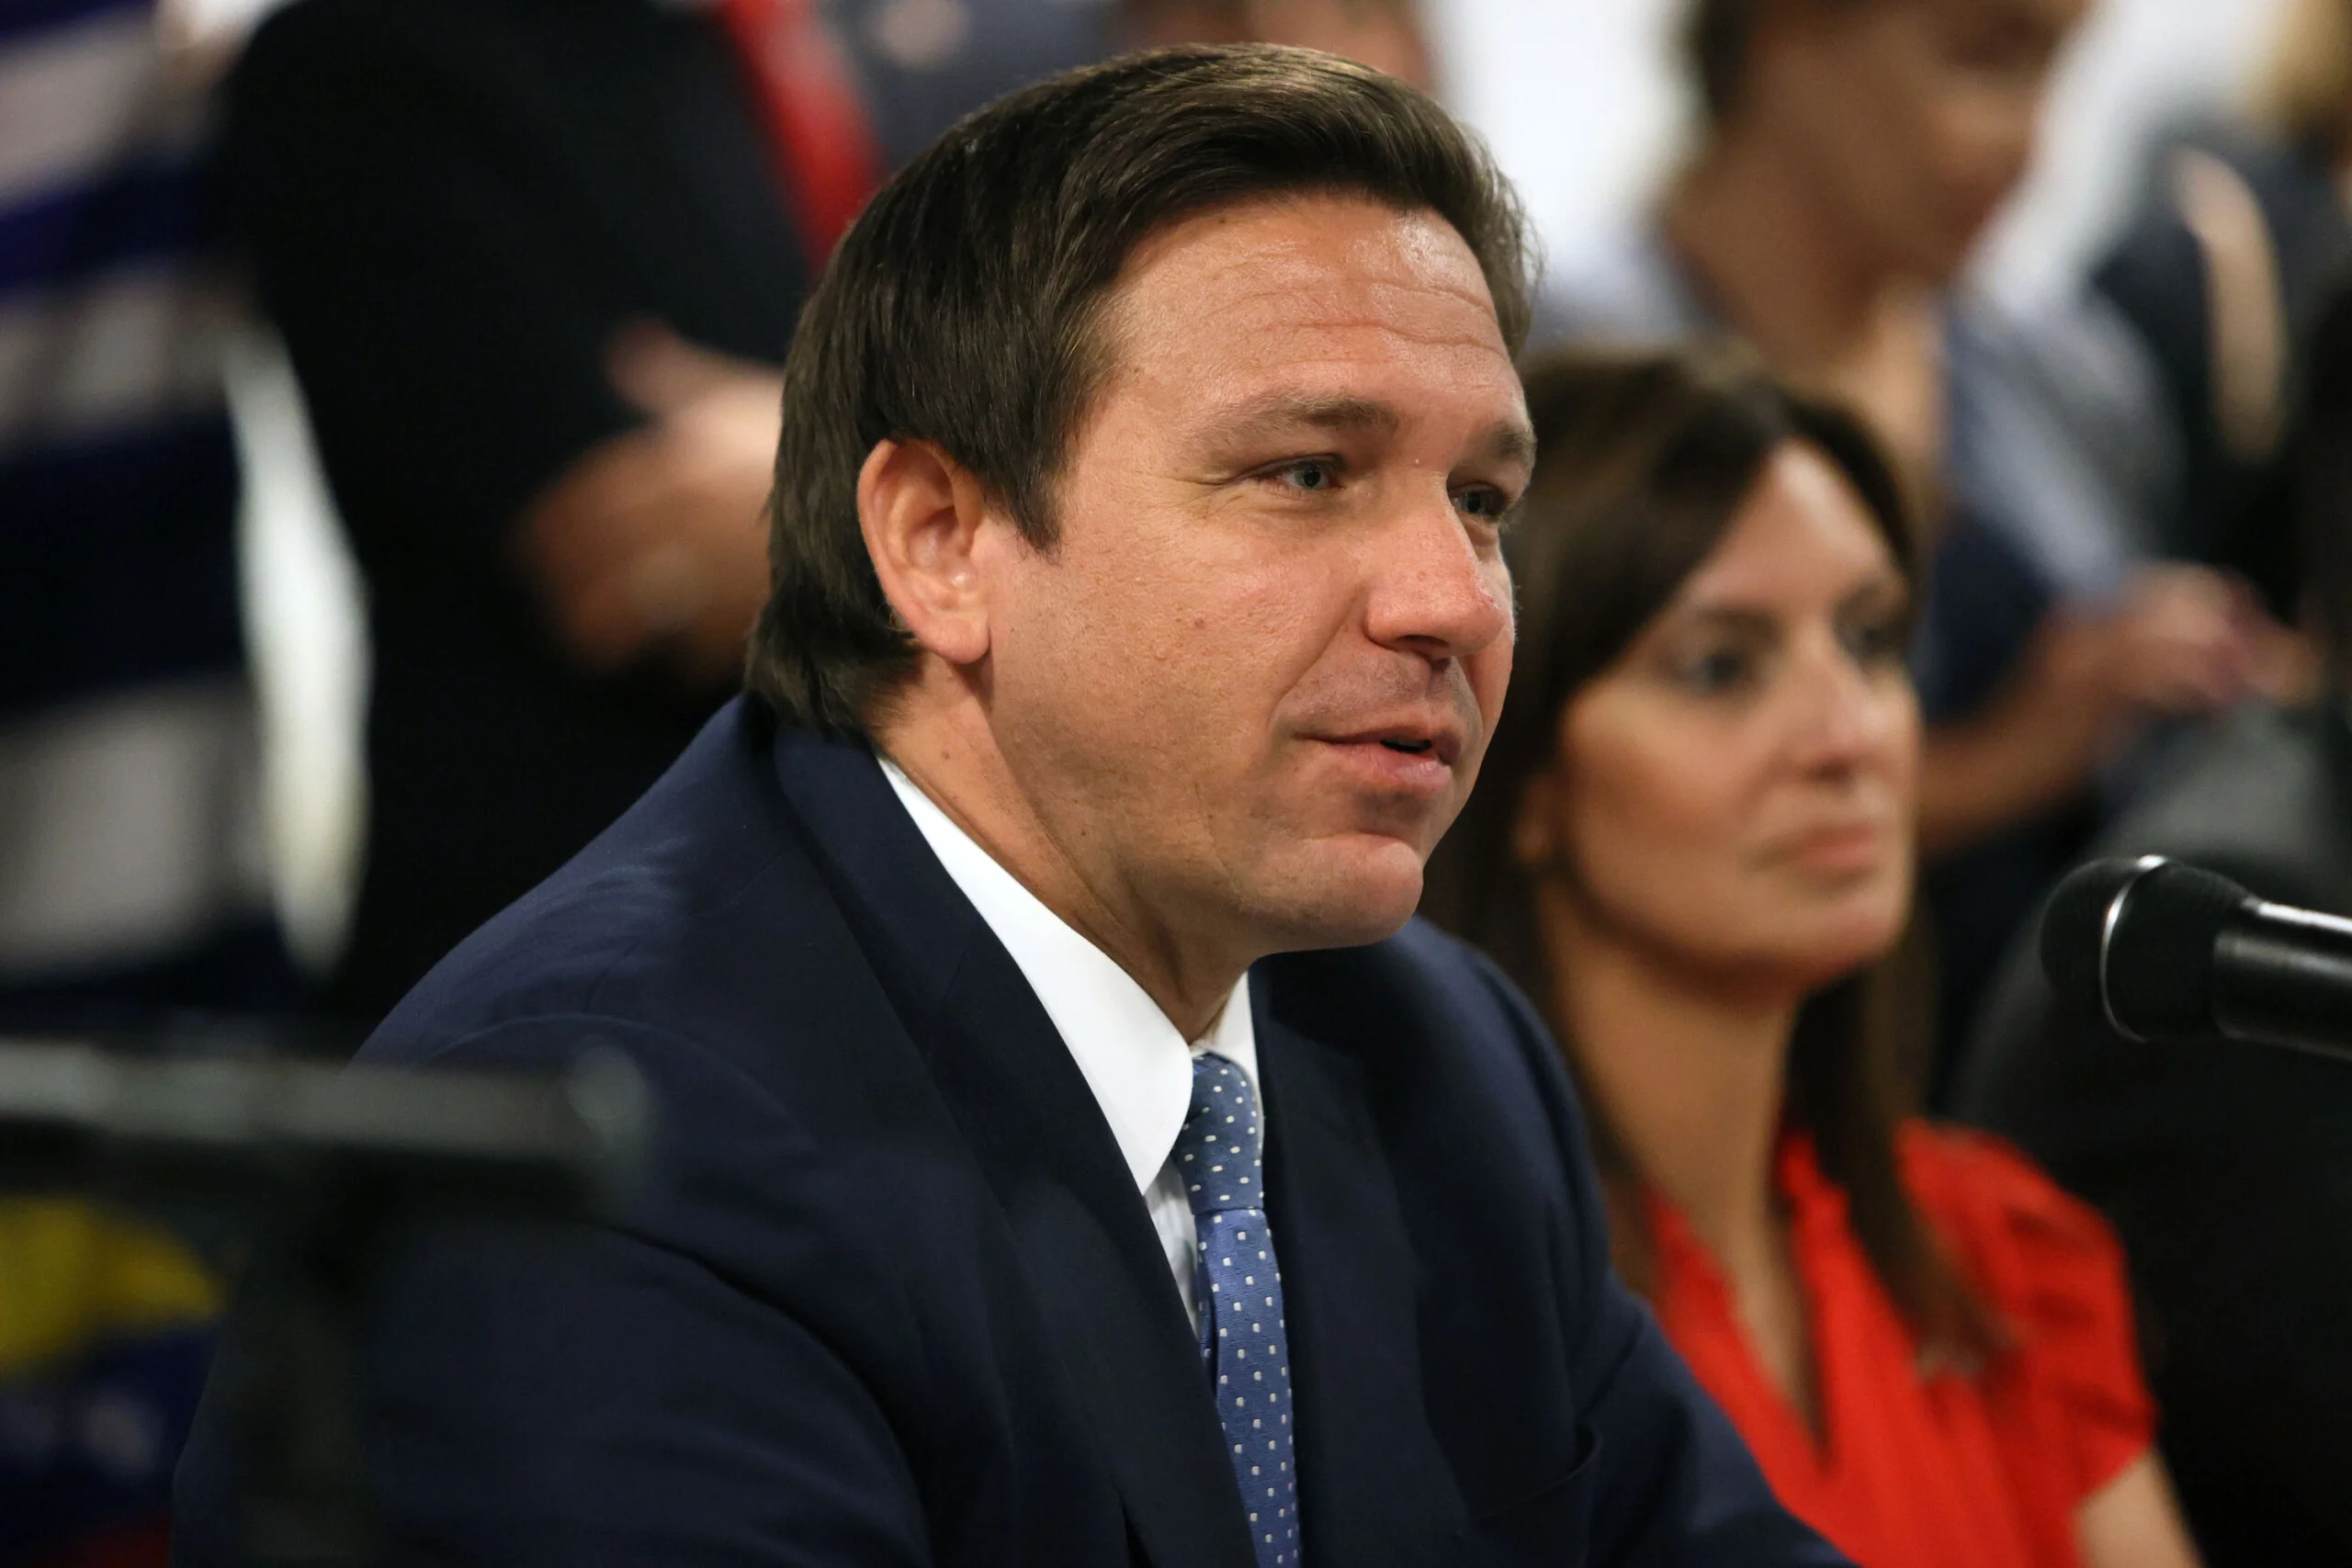 What are the Ron DeSantis' height and weight?